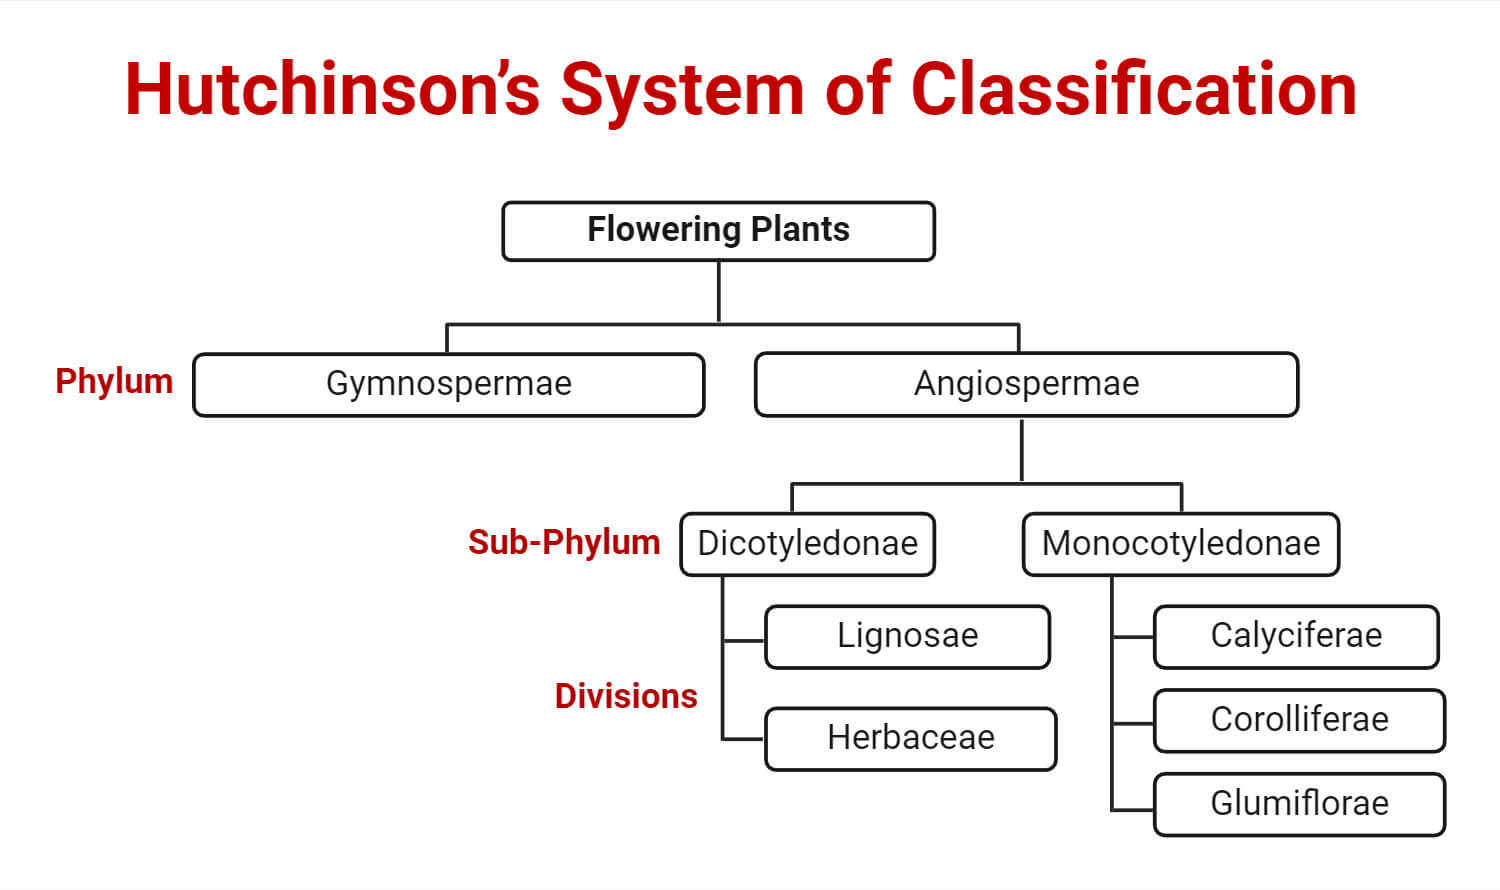 Hutchinson’s System of Classification